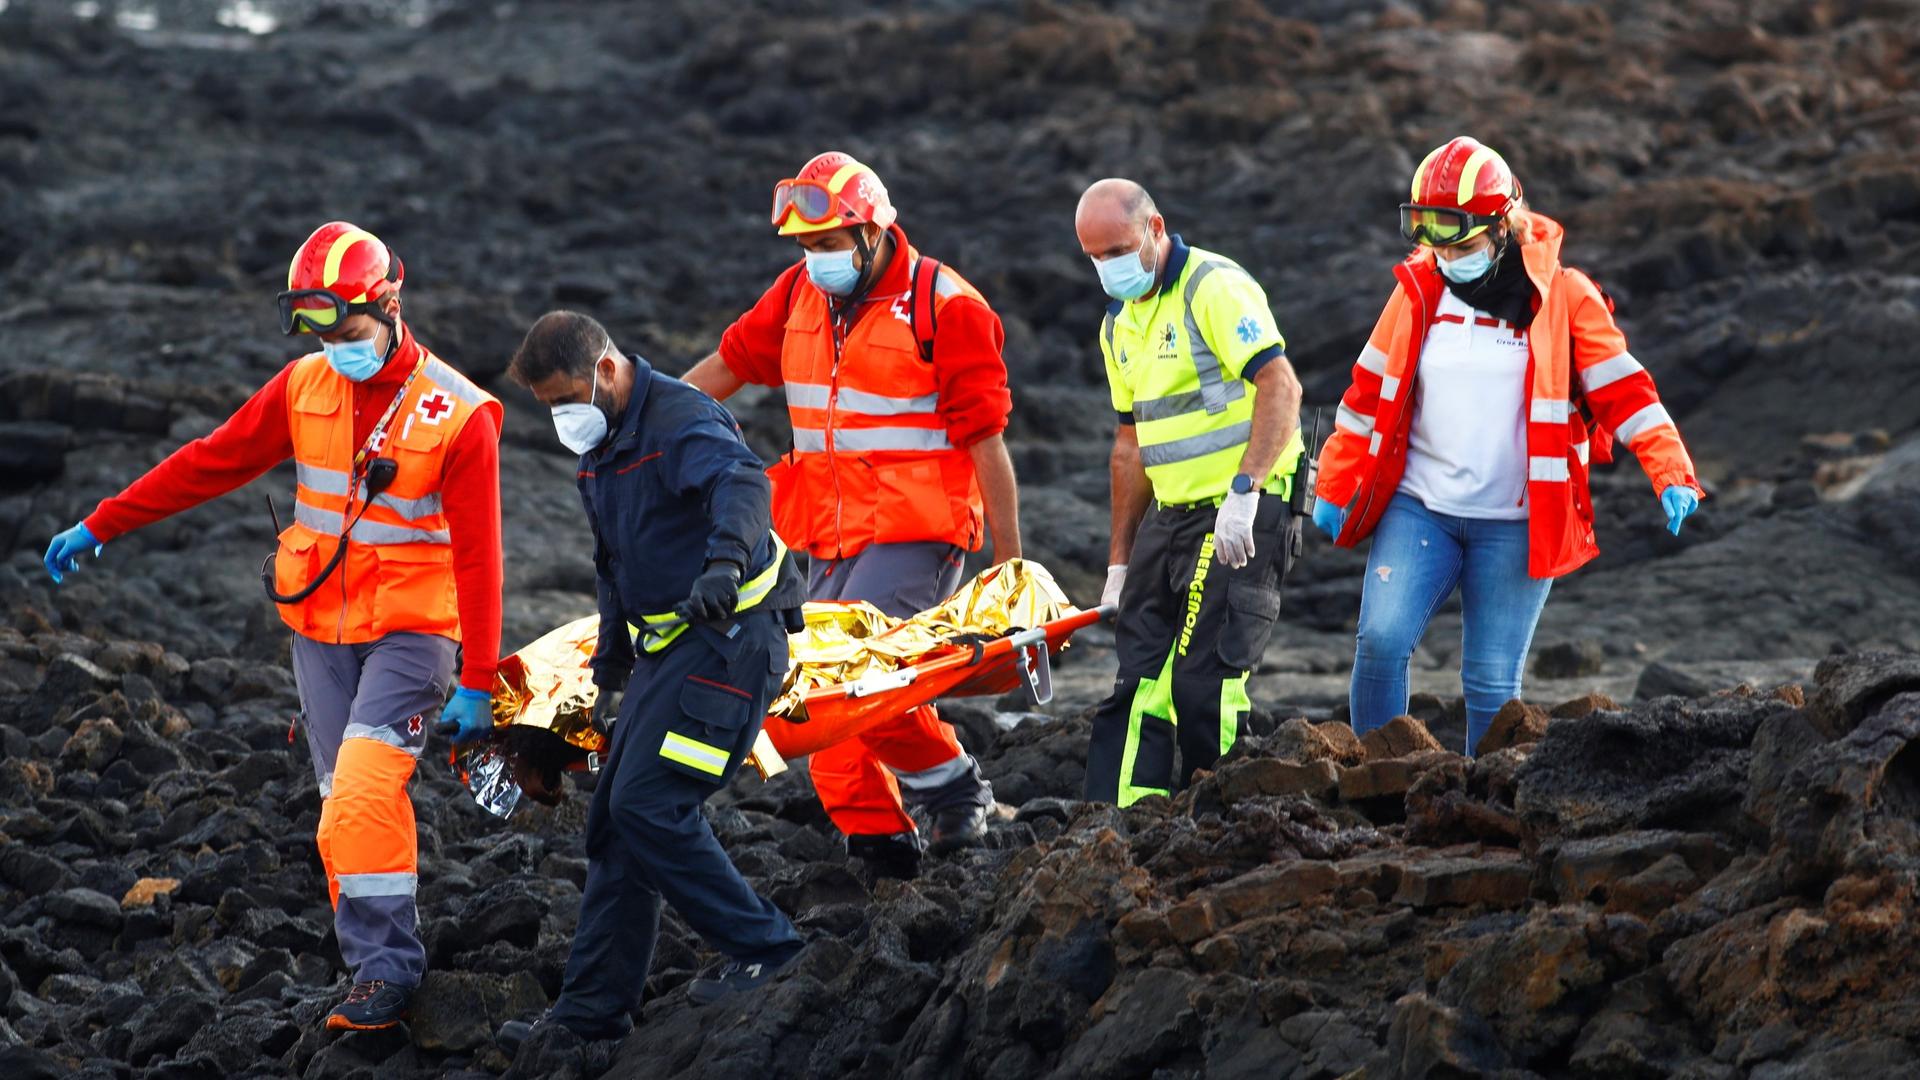 Rescue workers carry the body of a dead migrant after a boat with 35 migrants from the Maghreb region capsized at the beach of Orzola, in the Canary Island of Lanzarote, Spain, Nov. 25, 2020.